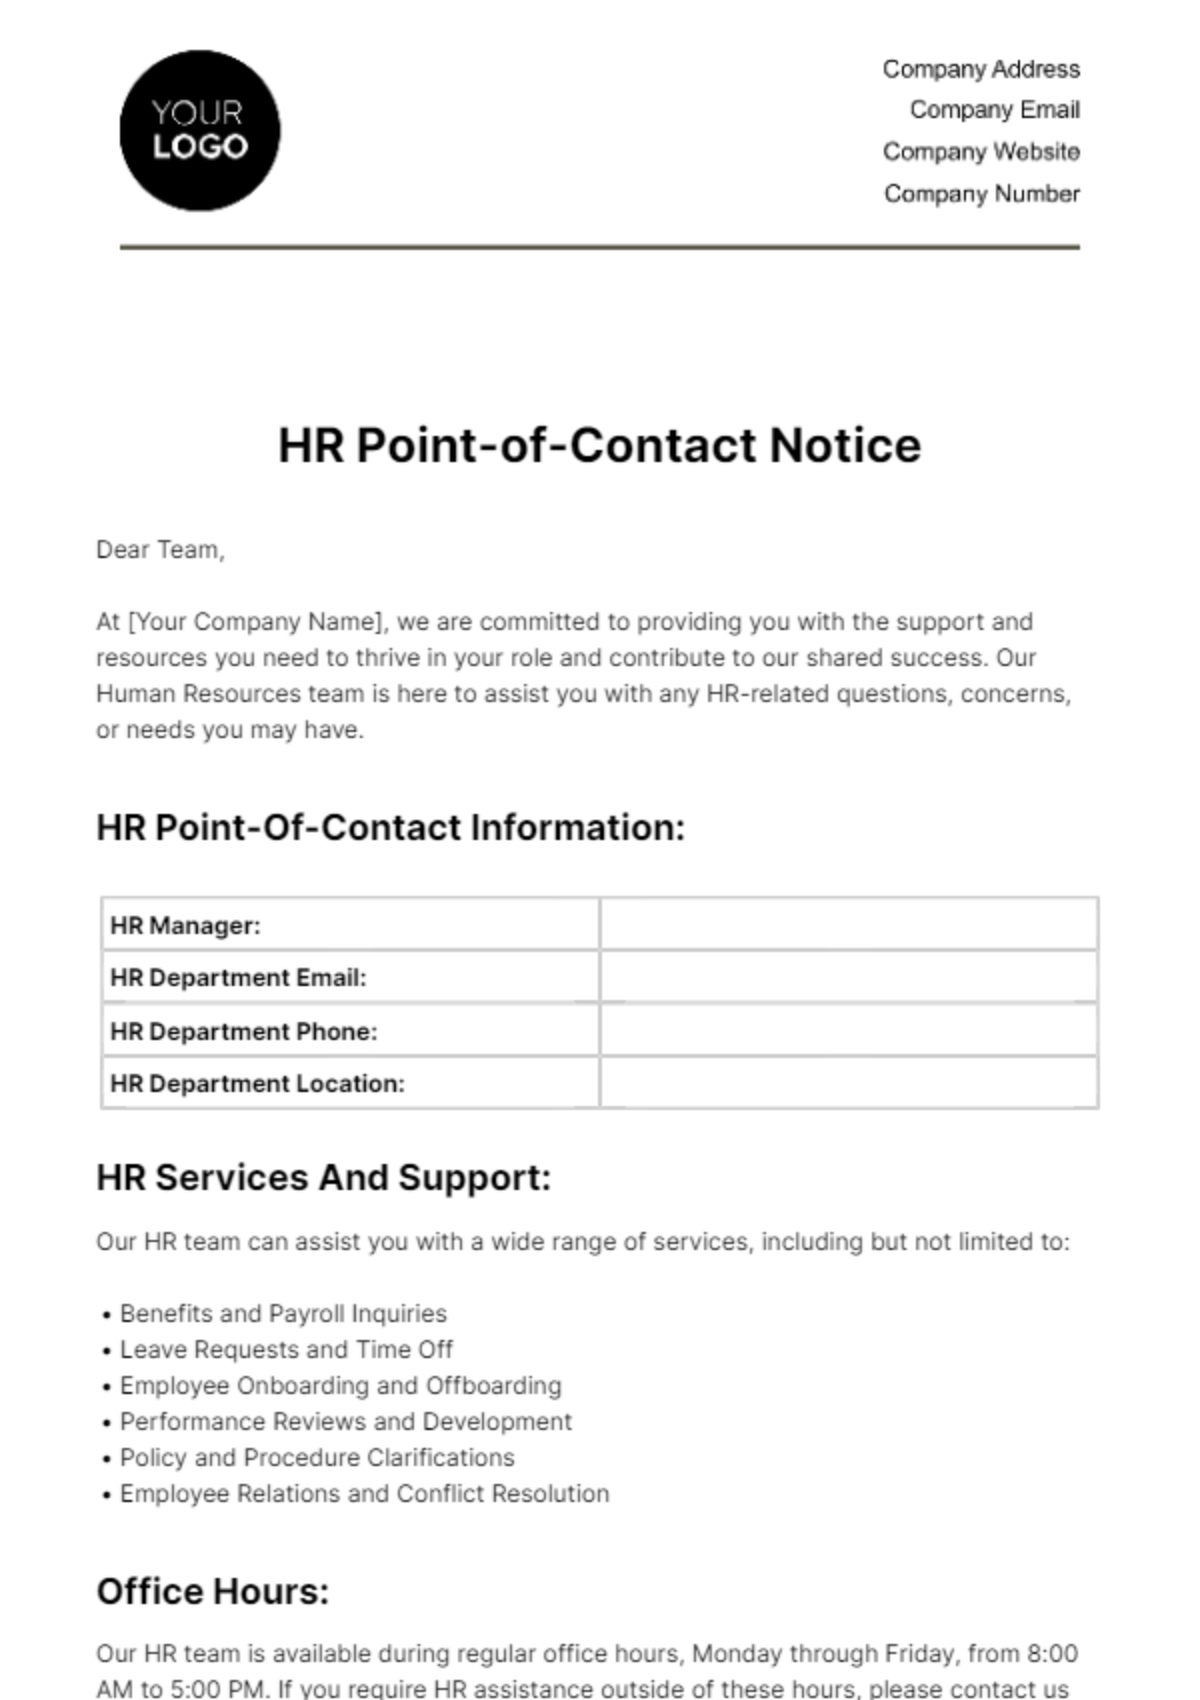 Free HR Point-of-Contact Notice Template